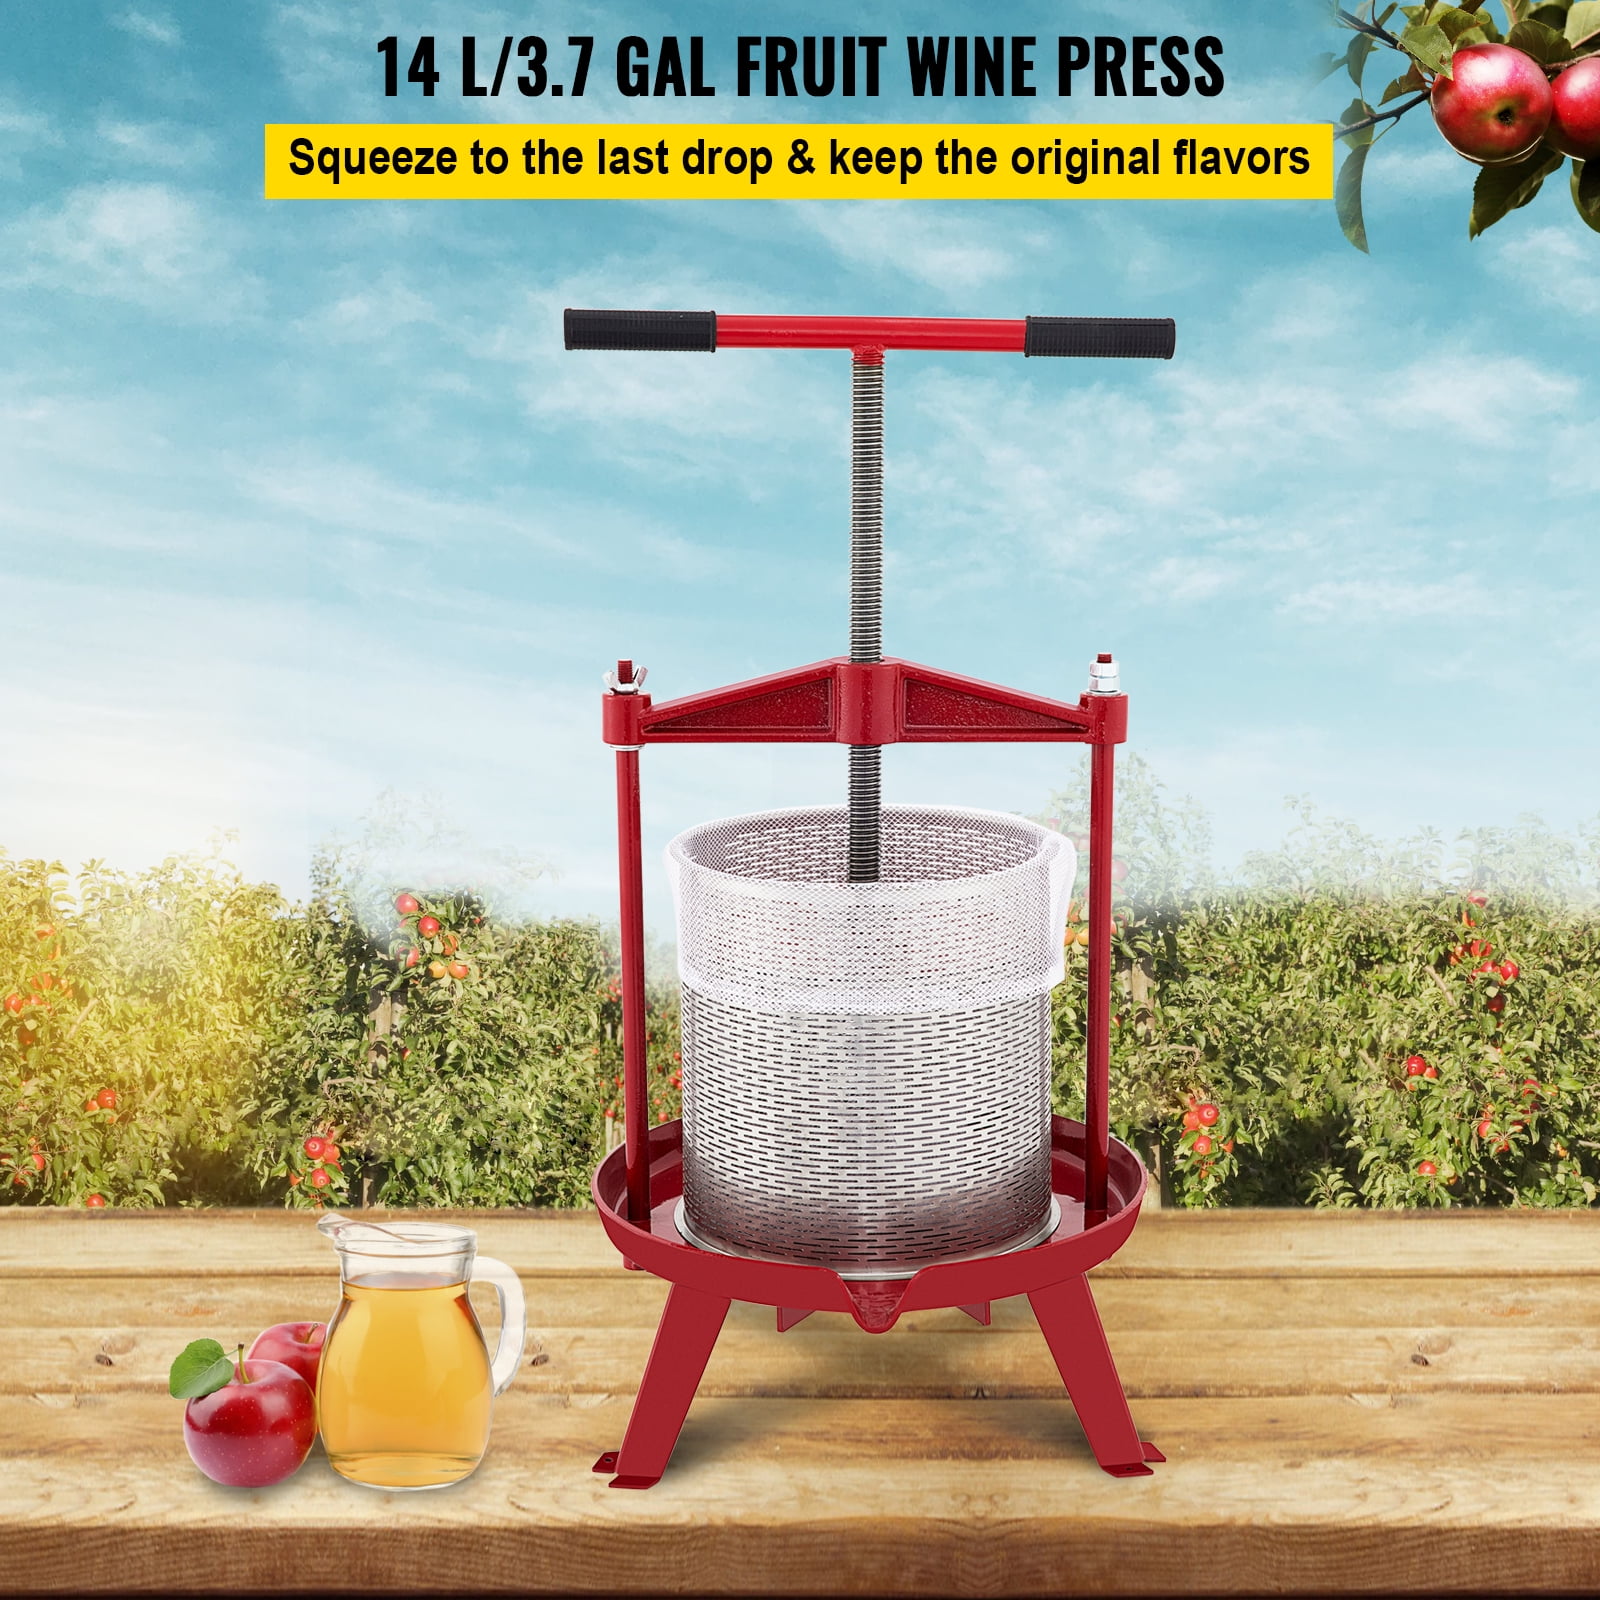 Cheese Tincture Herb Fruit Wine Manual Press - 0.53 Gallon Stainless Steel Barrels Press Machine for Juice, Vegetable,Wine,Olive Oil